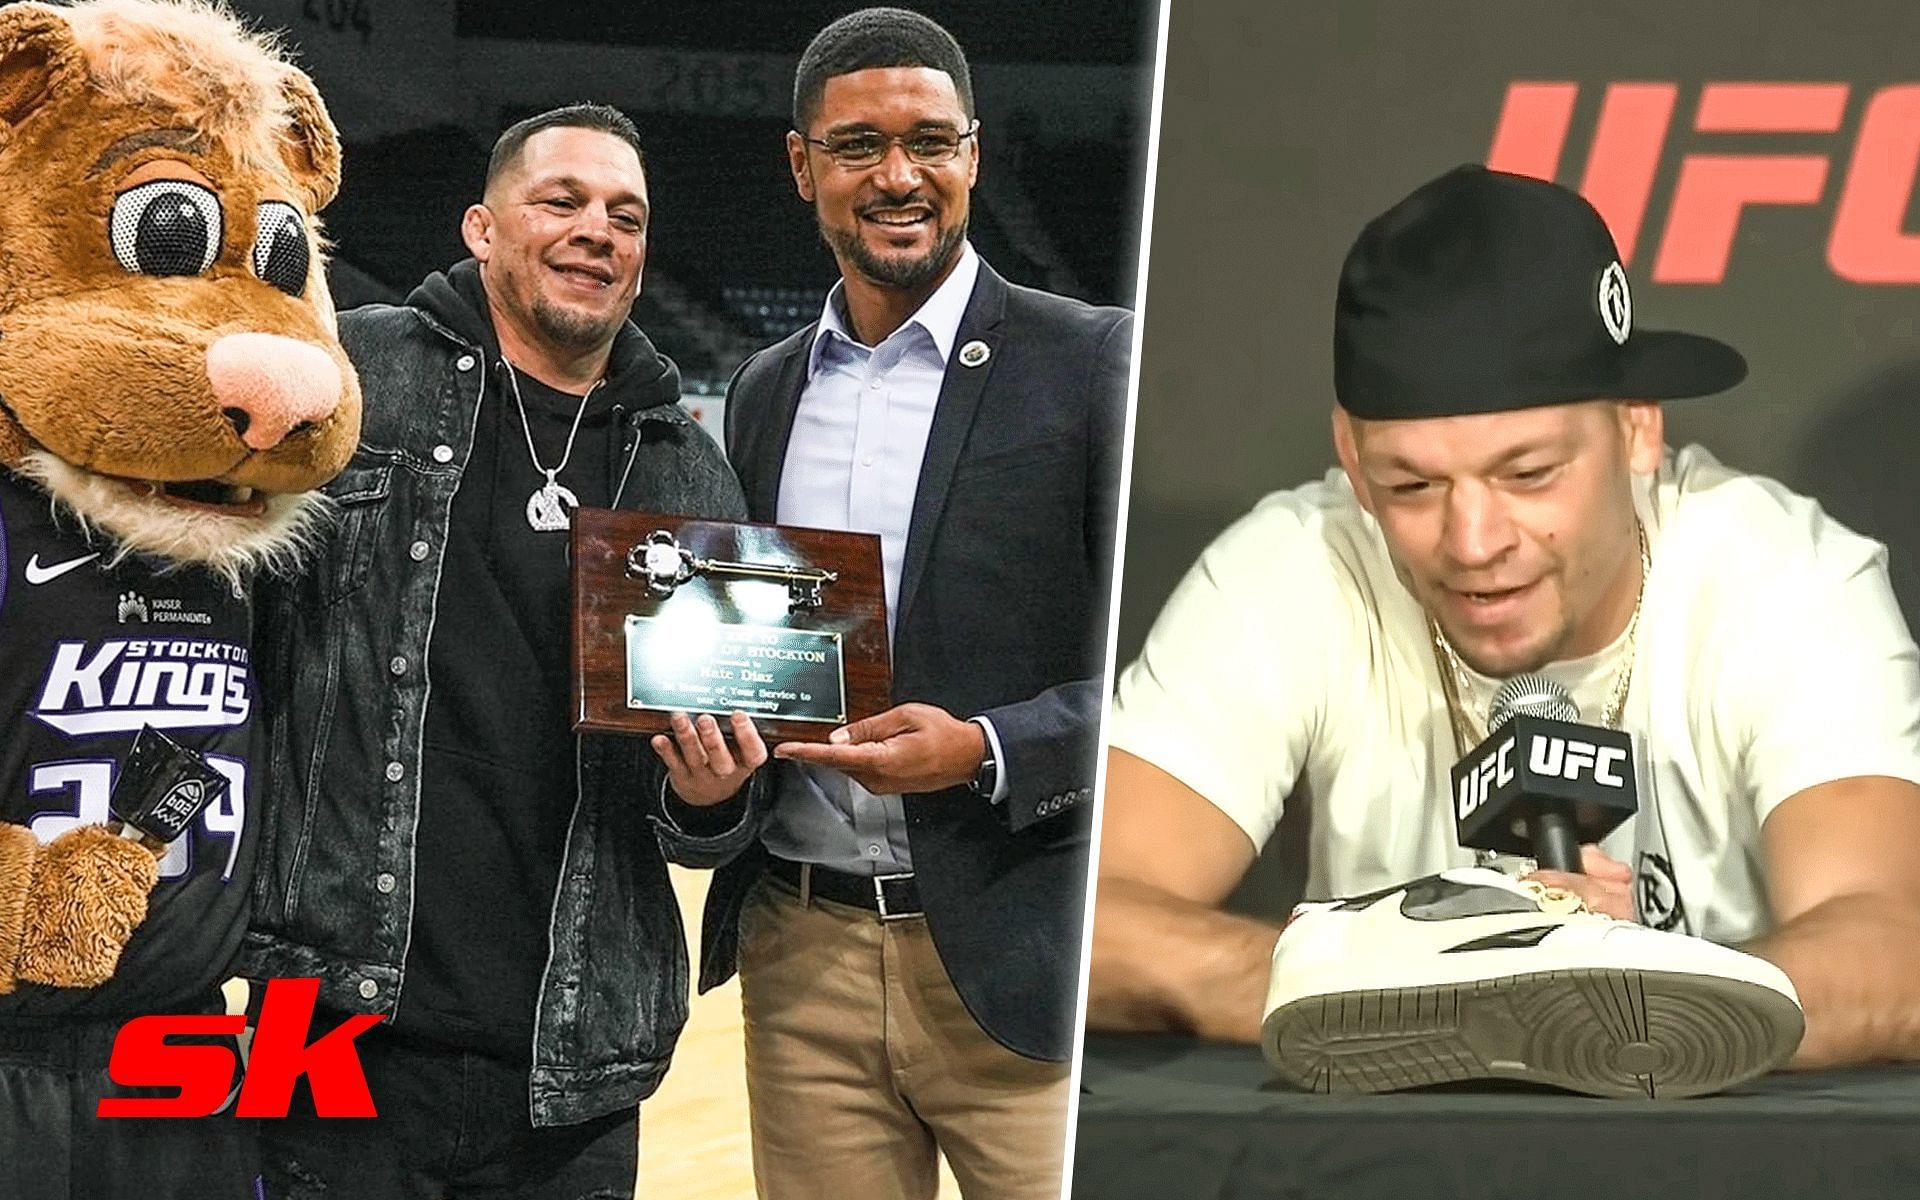 WATCH: Nate Diaz receives key to Stockton from mayor [Images via: UFC - Ultimate Fighting Championship | YouTube, @stocktonkings on Instagram]